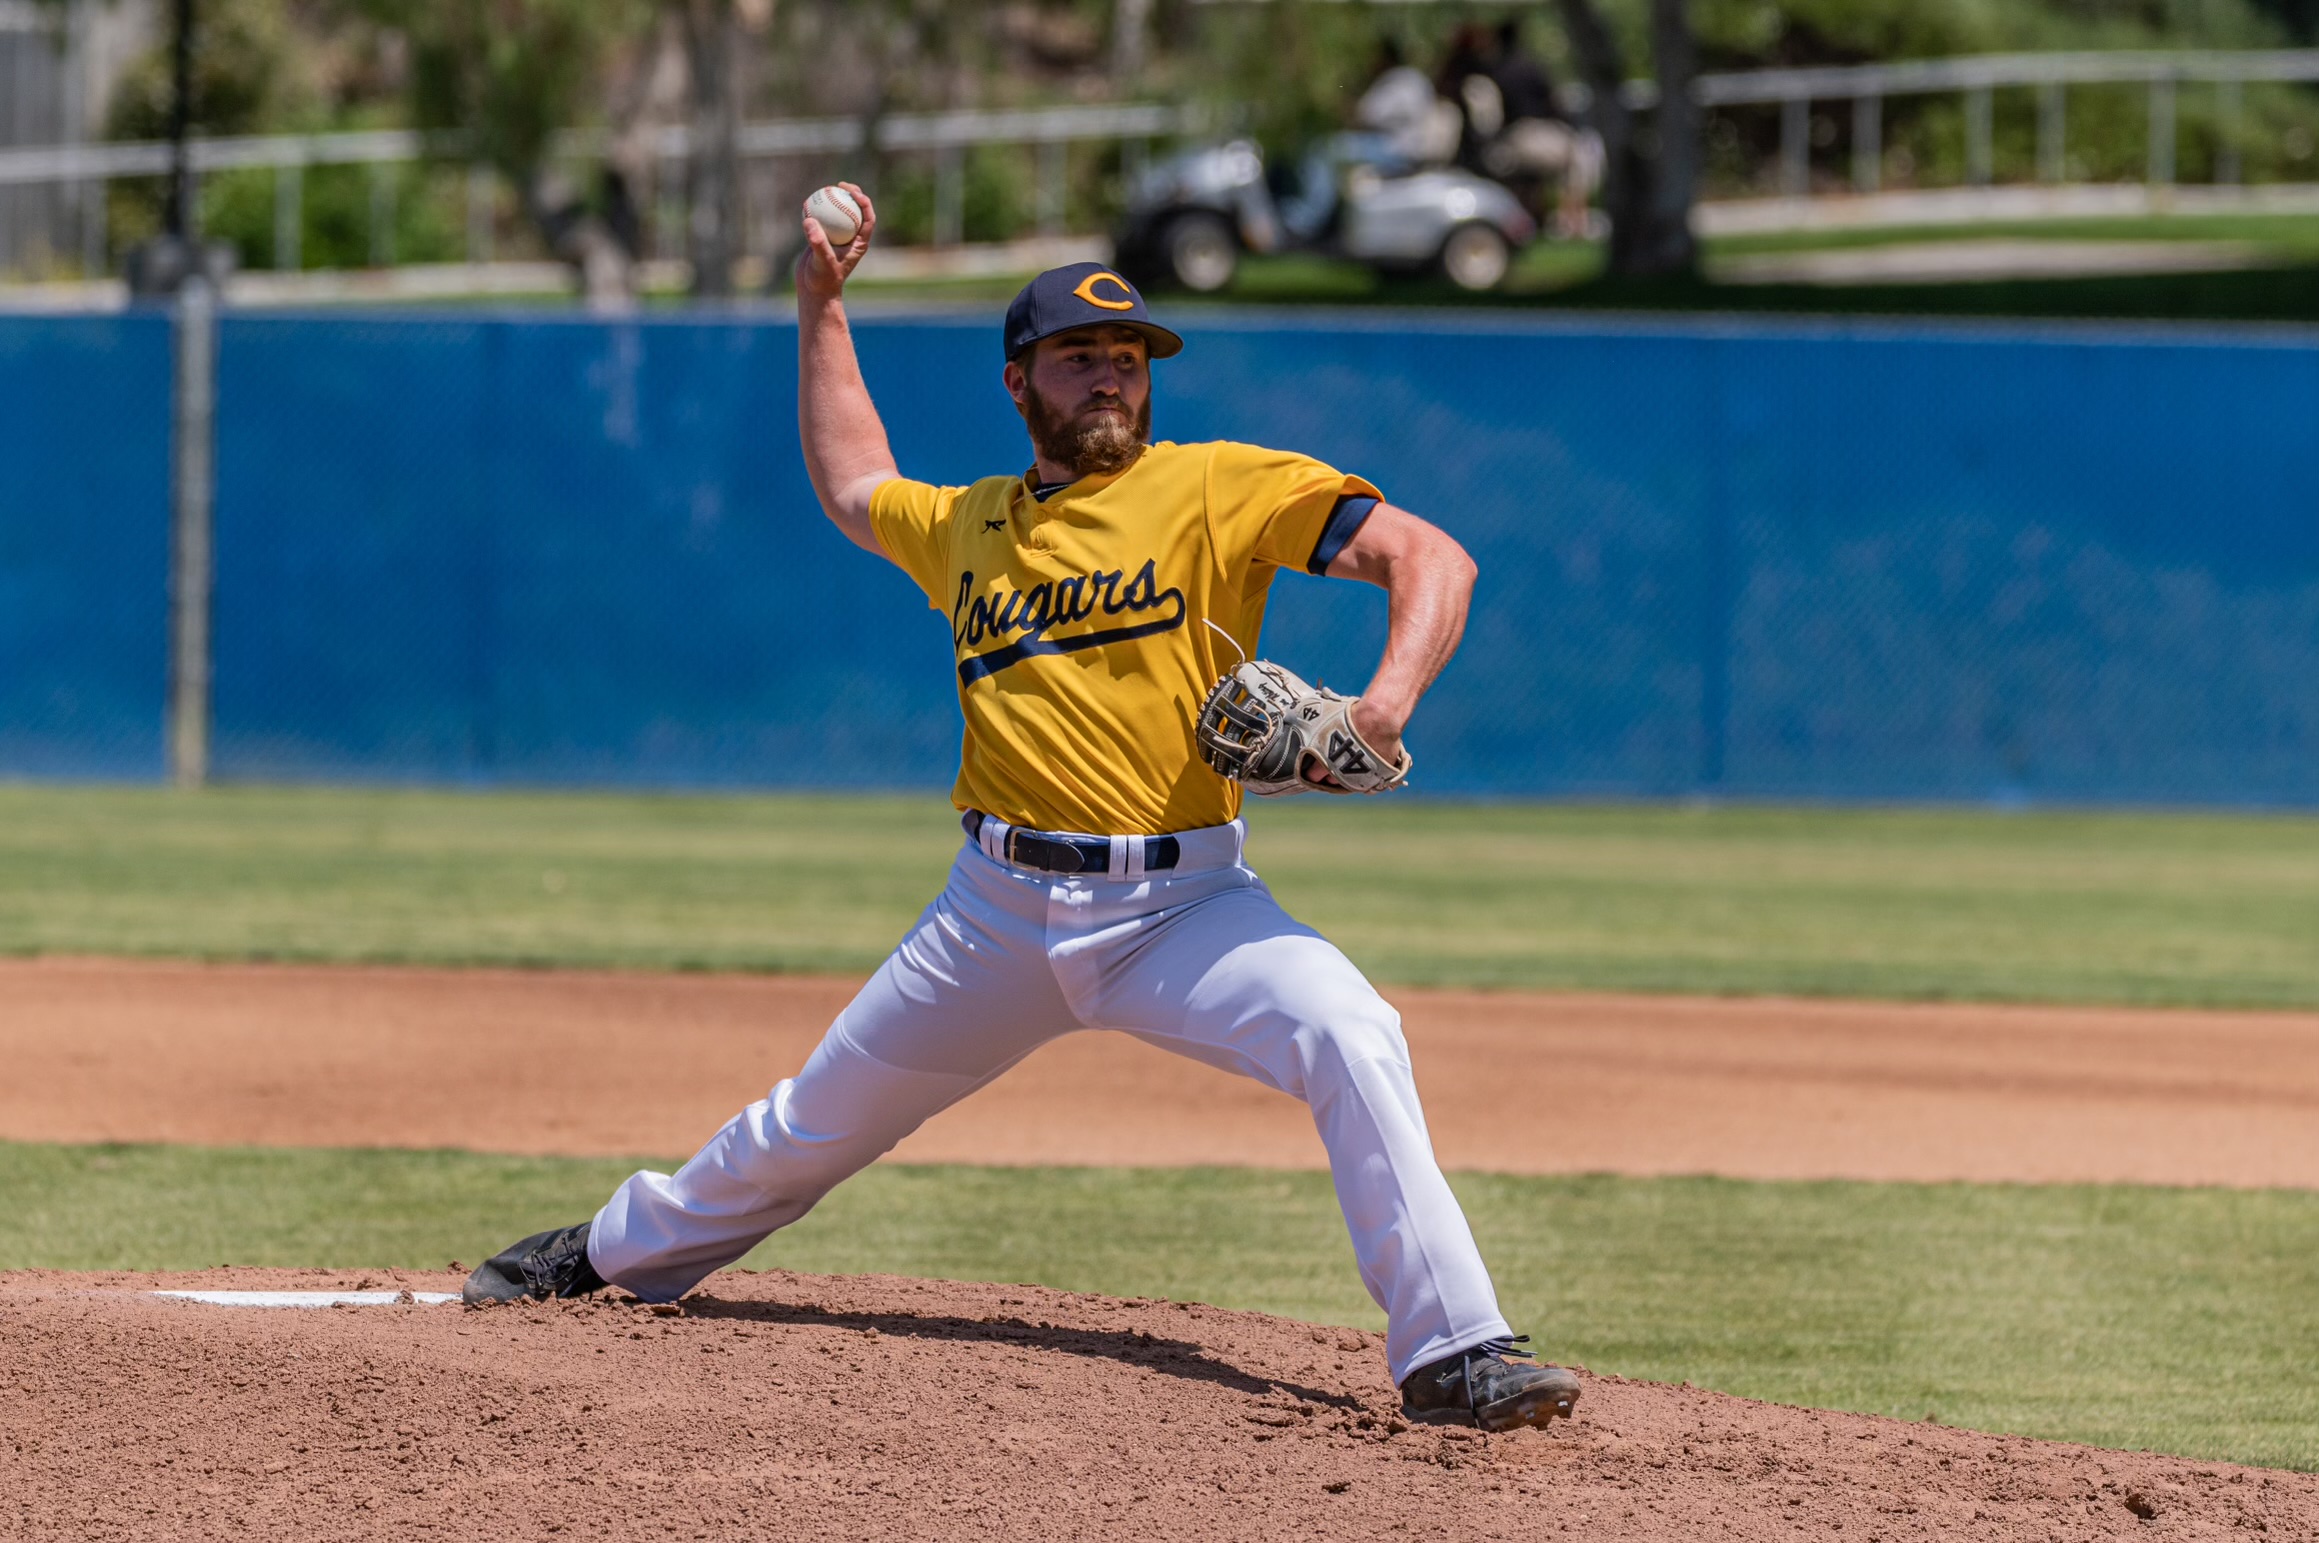 College of the Canyons baseball pitcher Brandon Whitting vs. Cerro Coso College on May 3, 2022.